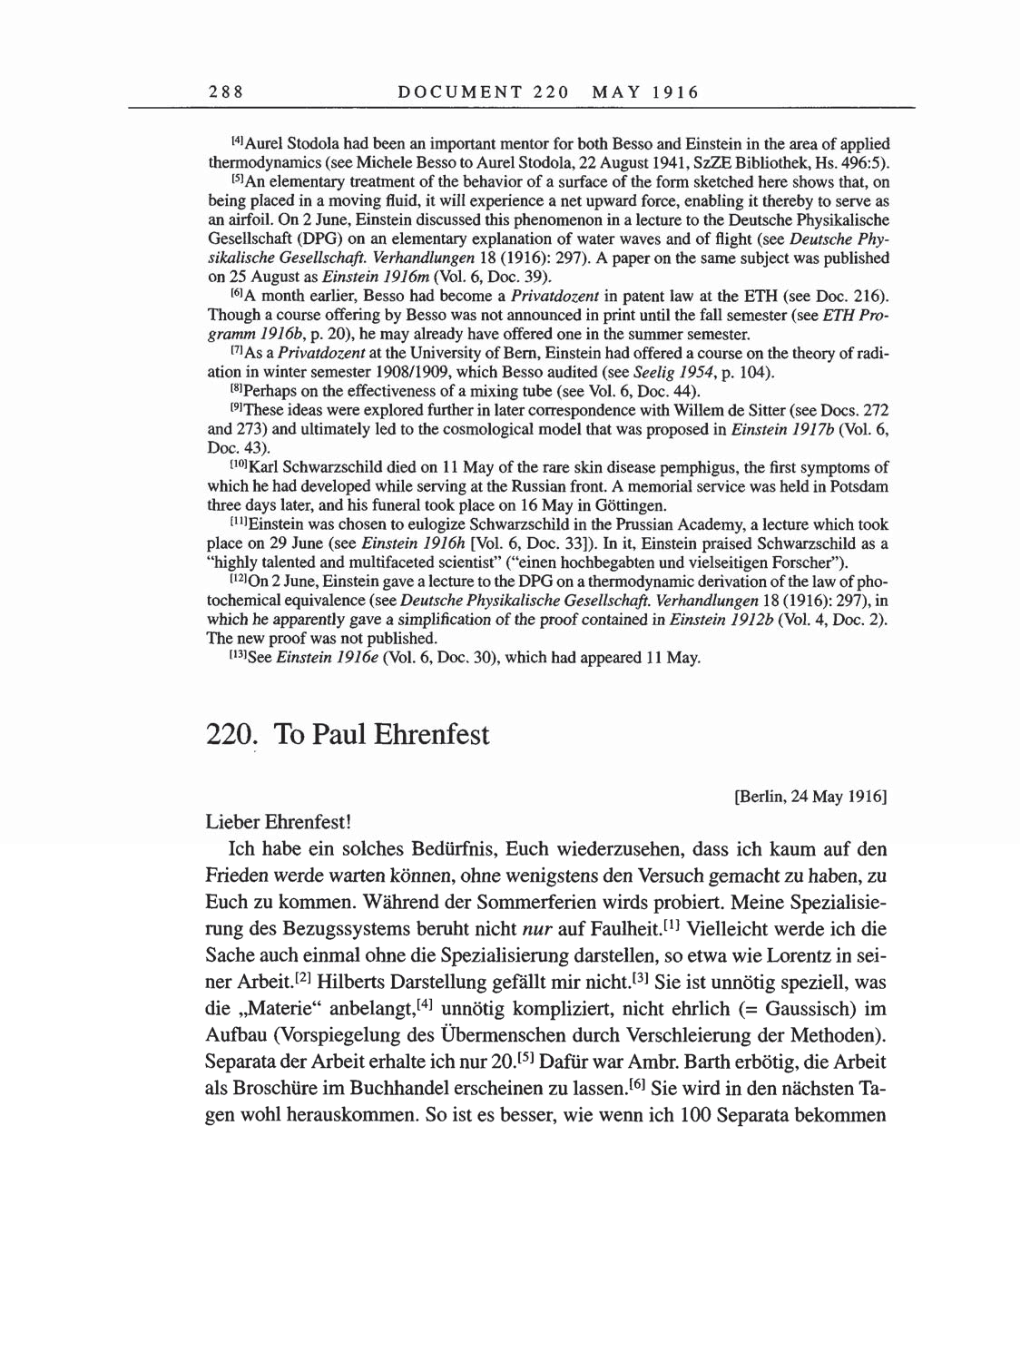 Volume 8, Part A: The Berlin Years: Correspondence 1914-1917 page 288